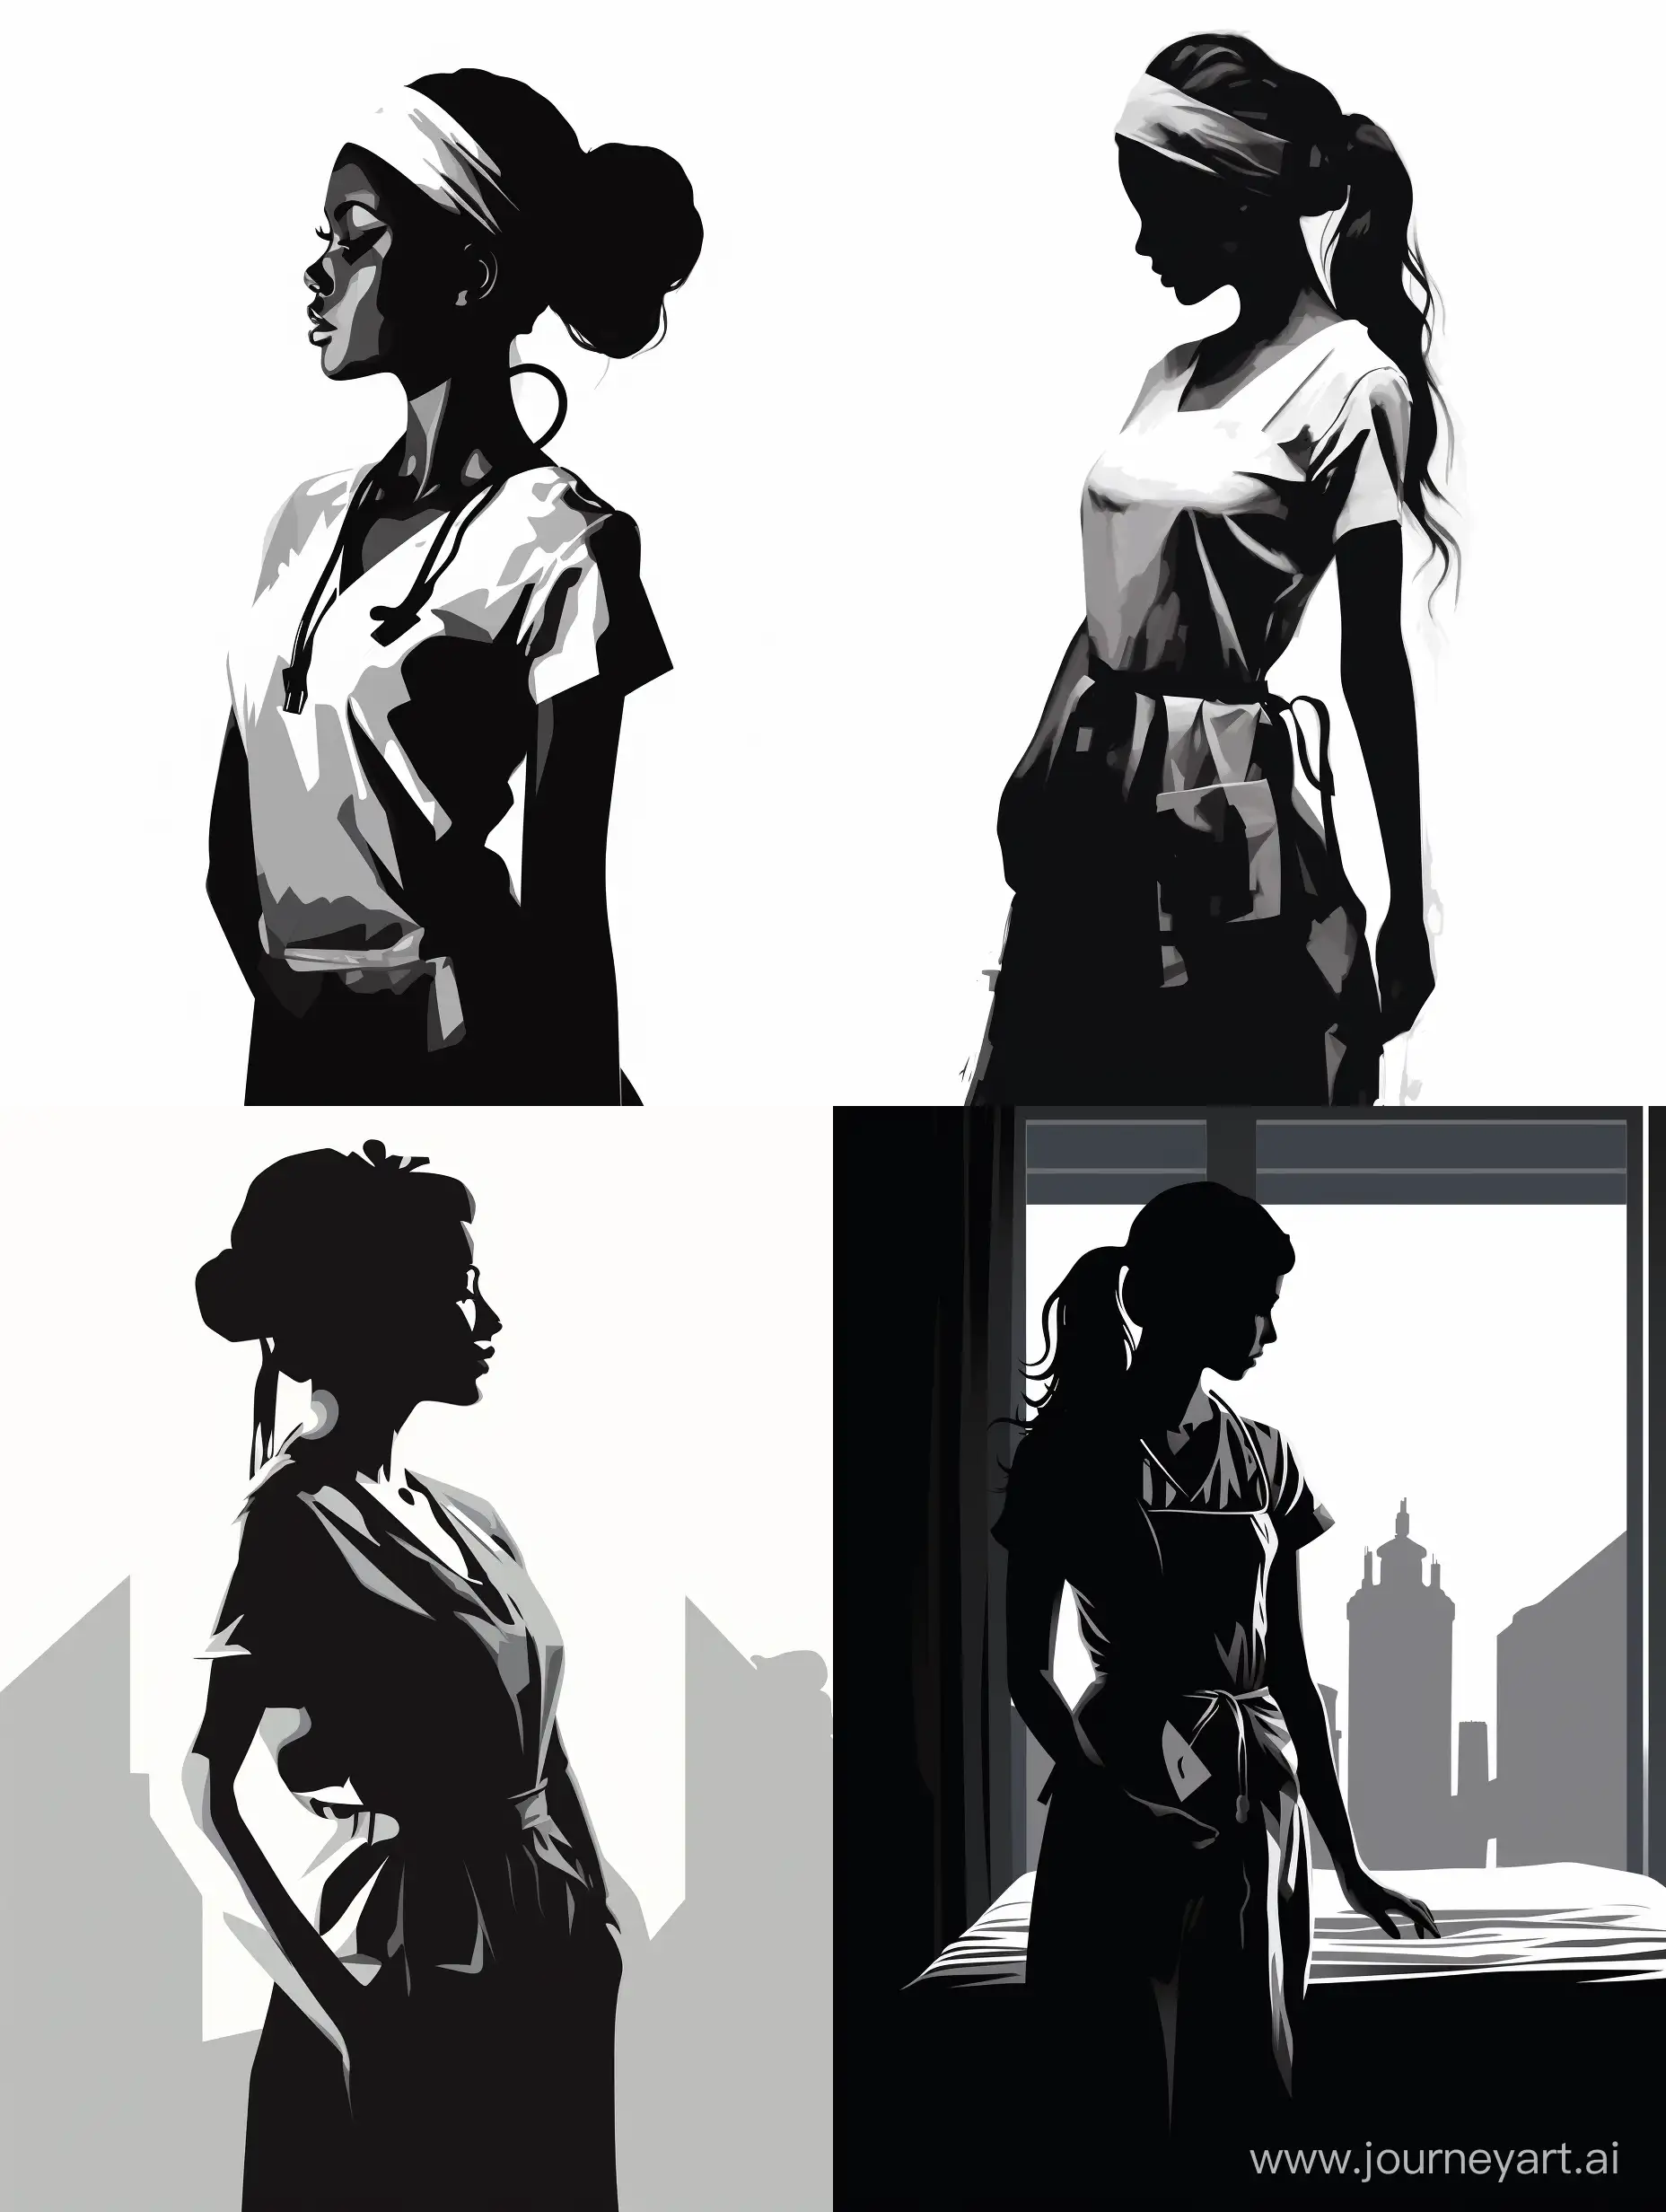 Professional-Nurse-Silhouette-Art-in-Striking-Black-and-White-Style